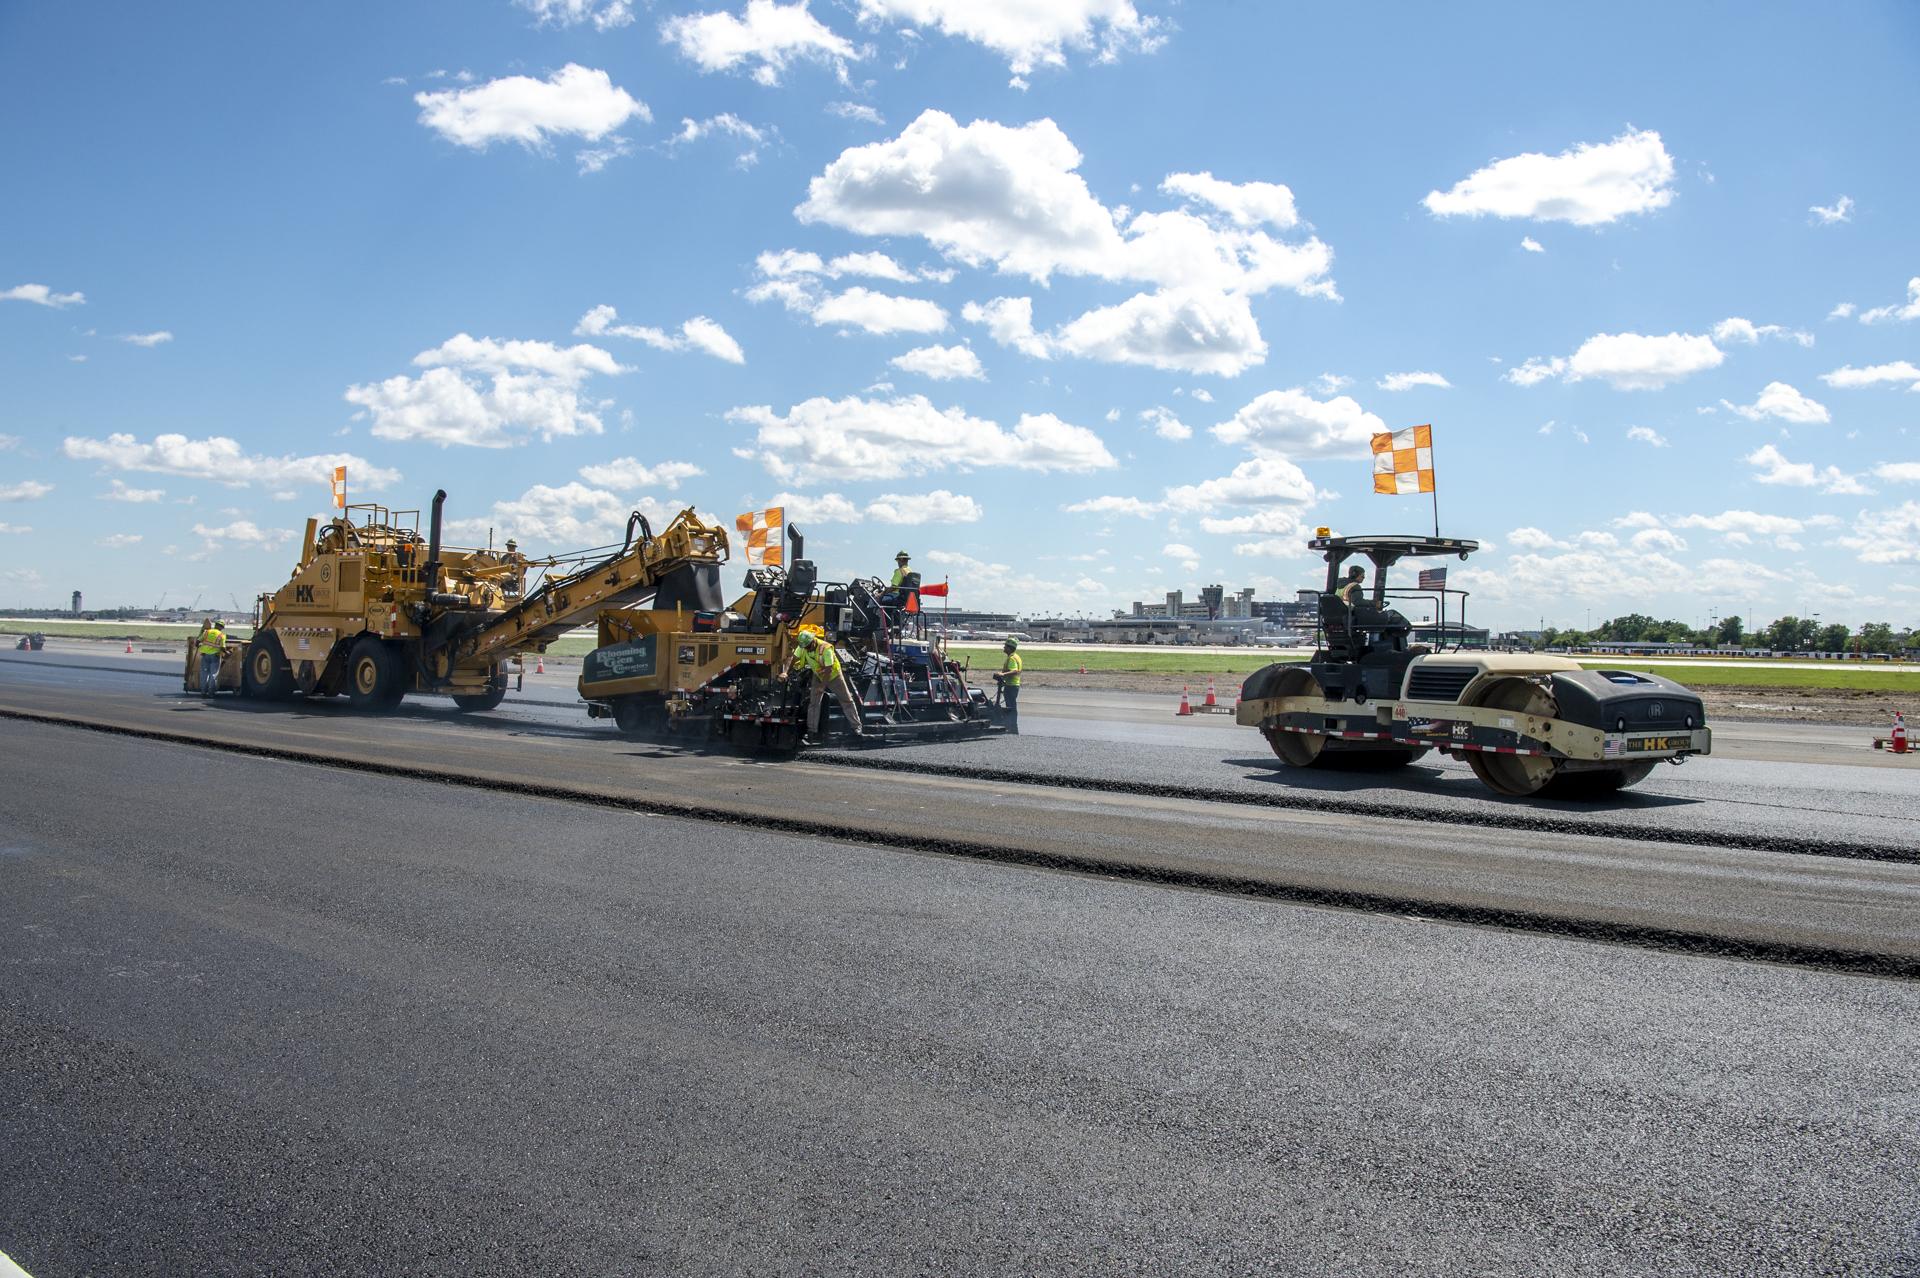 Contractors work on the rehabilitation of the East Airfield, which earned PHL an award